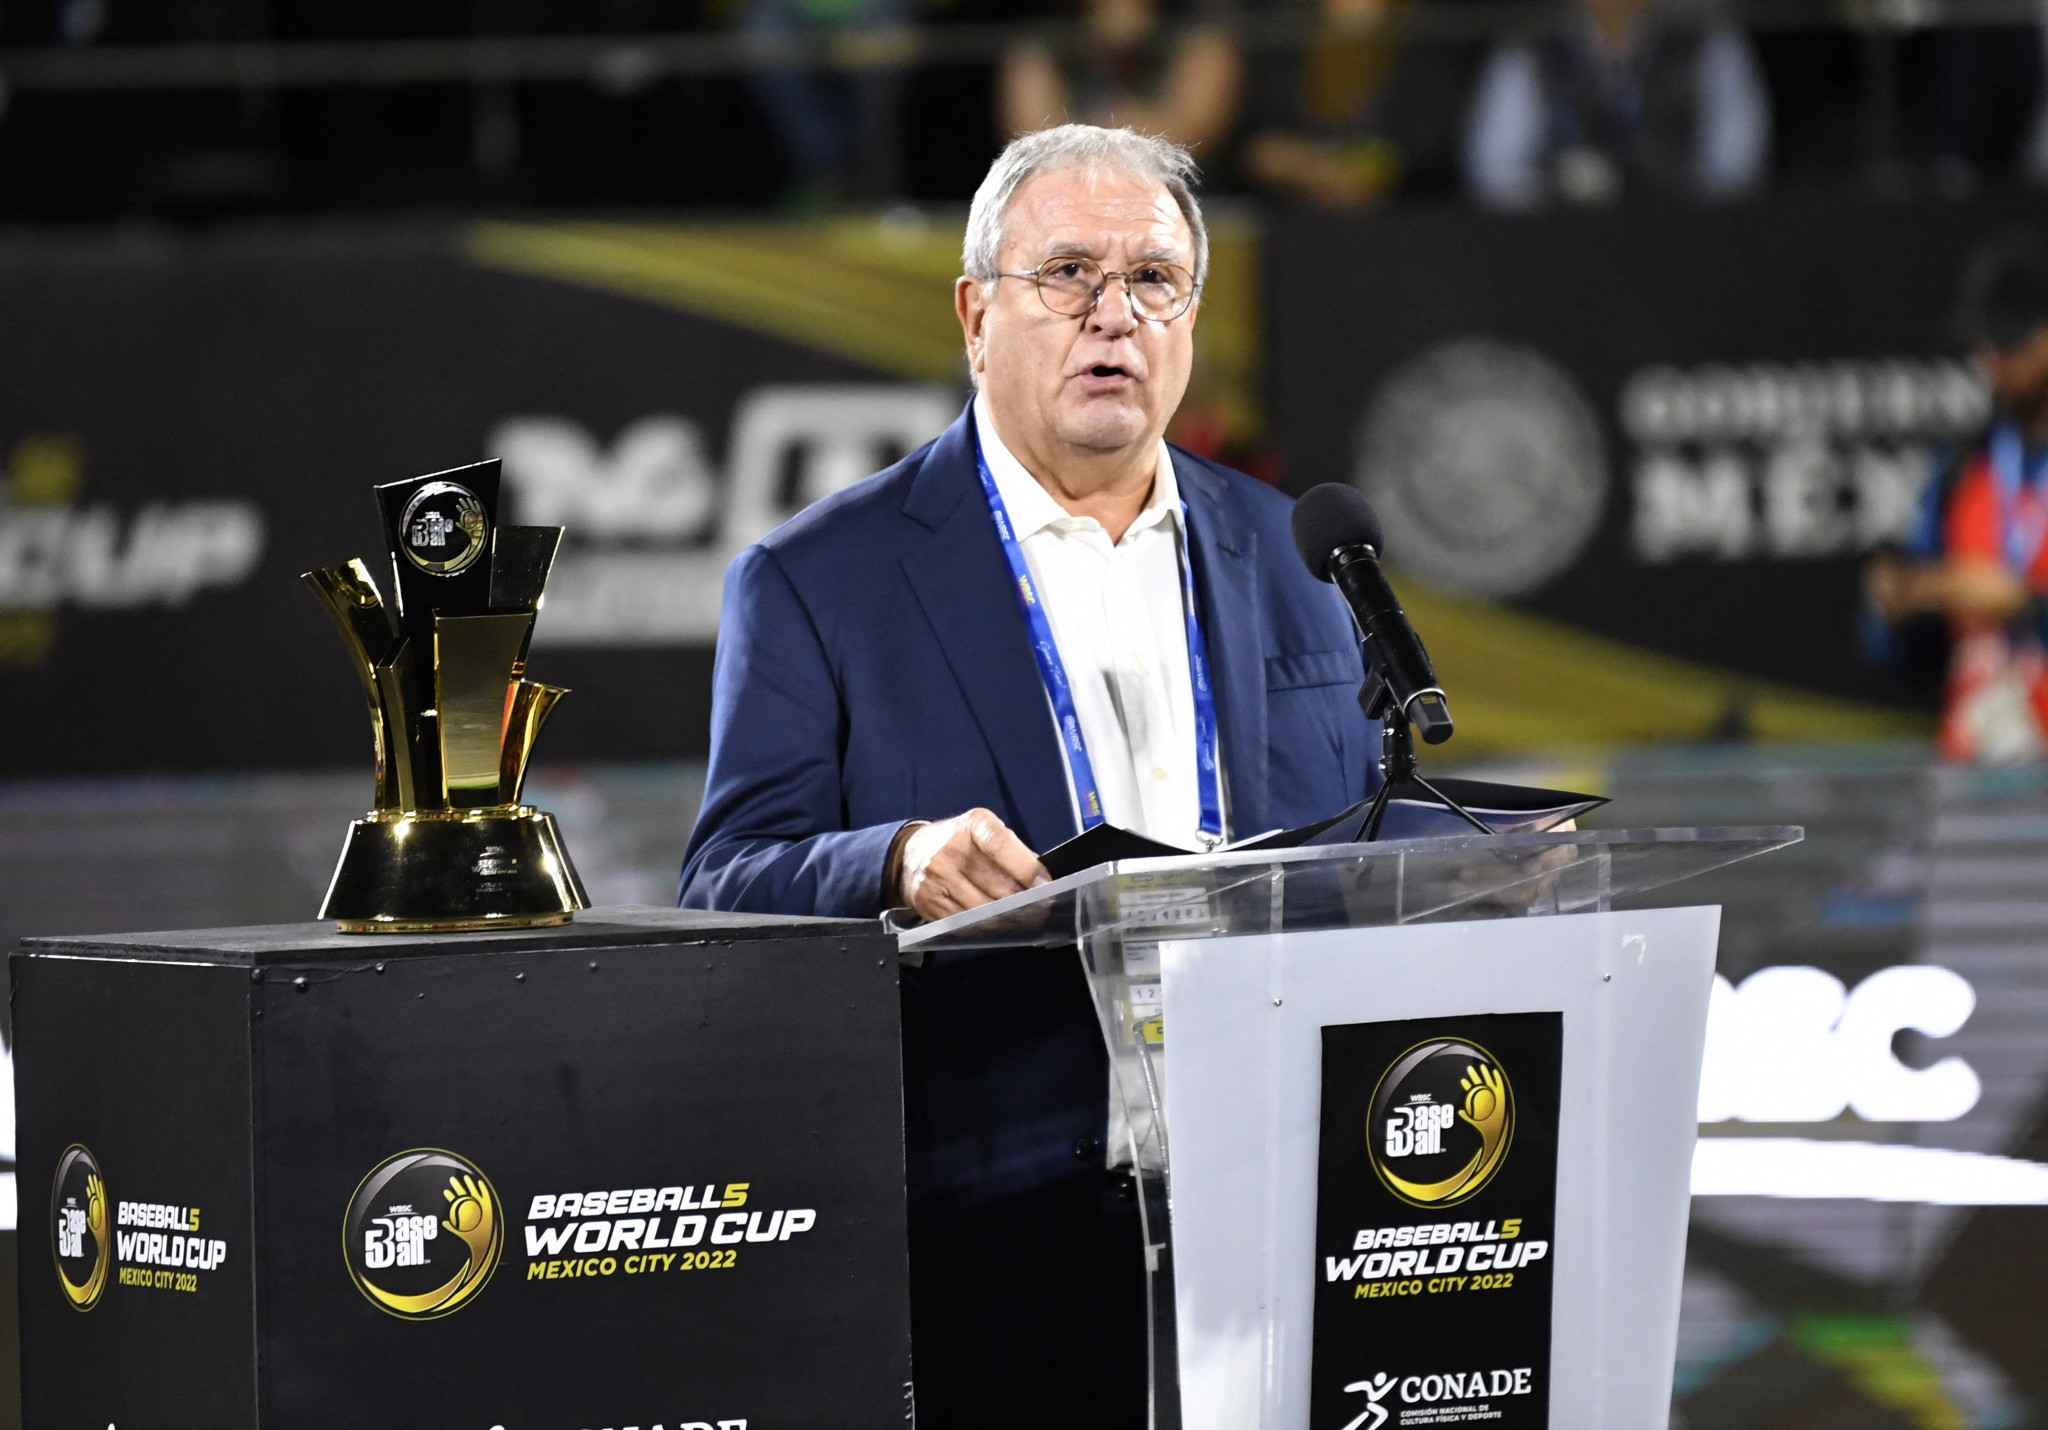 Riccardo Fraccari: WBSC's culture of innovation brings series of firsts to 2022